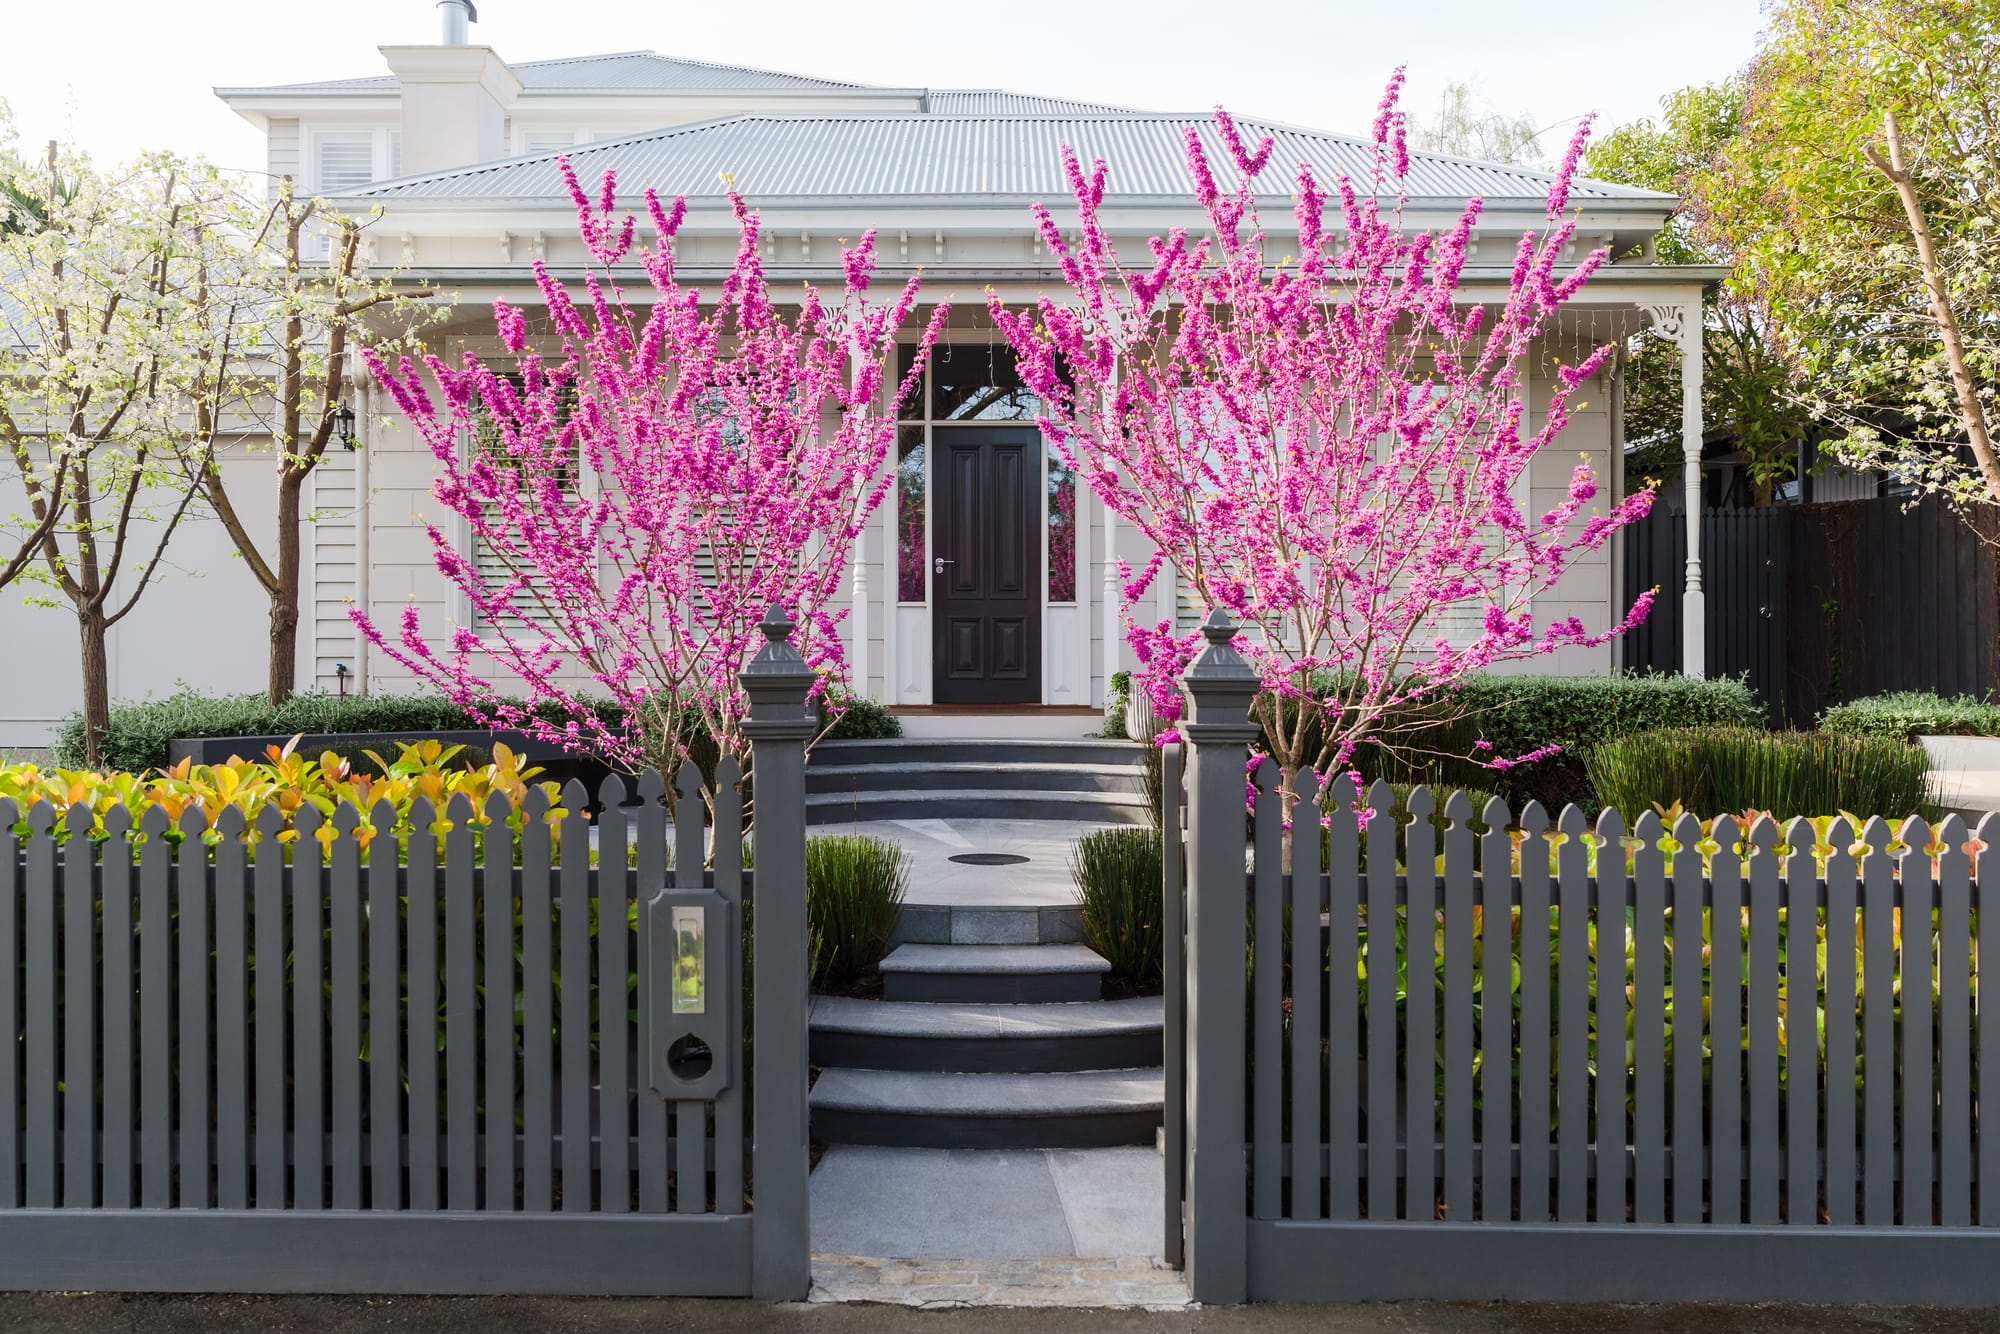 Sir Garnet Surrey Hills by Julie Crowe Landscape Design. Photography by Erik Holt Photography. Street view of white Victoria-era home with two bright pin trees along front fence line. Steps lead up to circular landing before front door. 